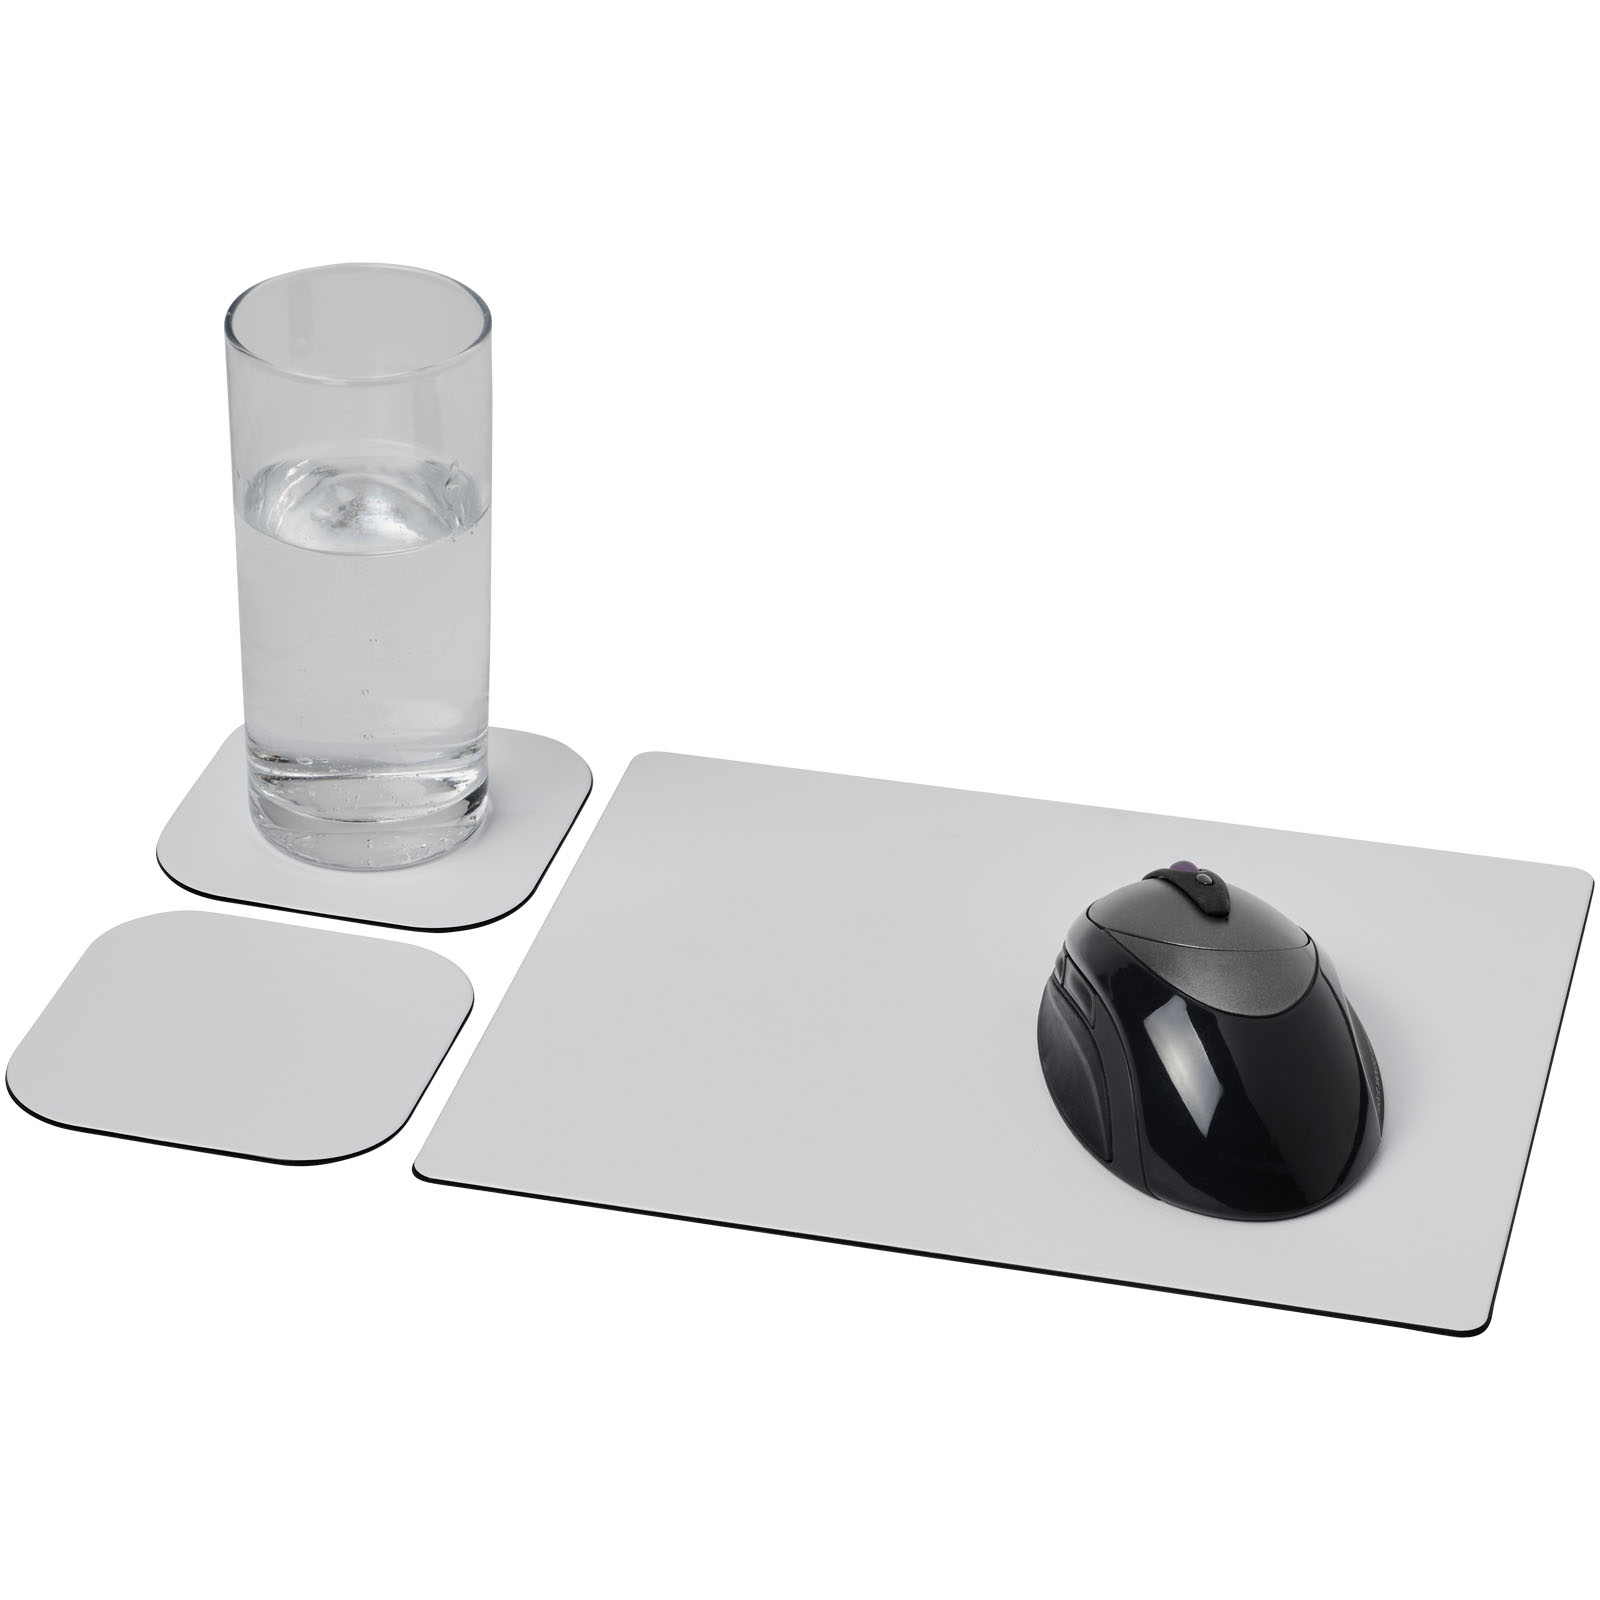 Advertising Computer Accessories - Brite-Mat® mouse mat and coaster set combo 3 - 0